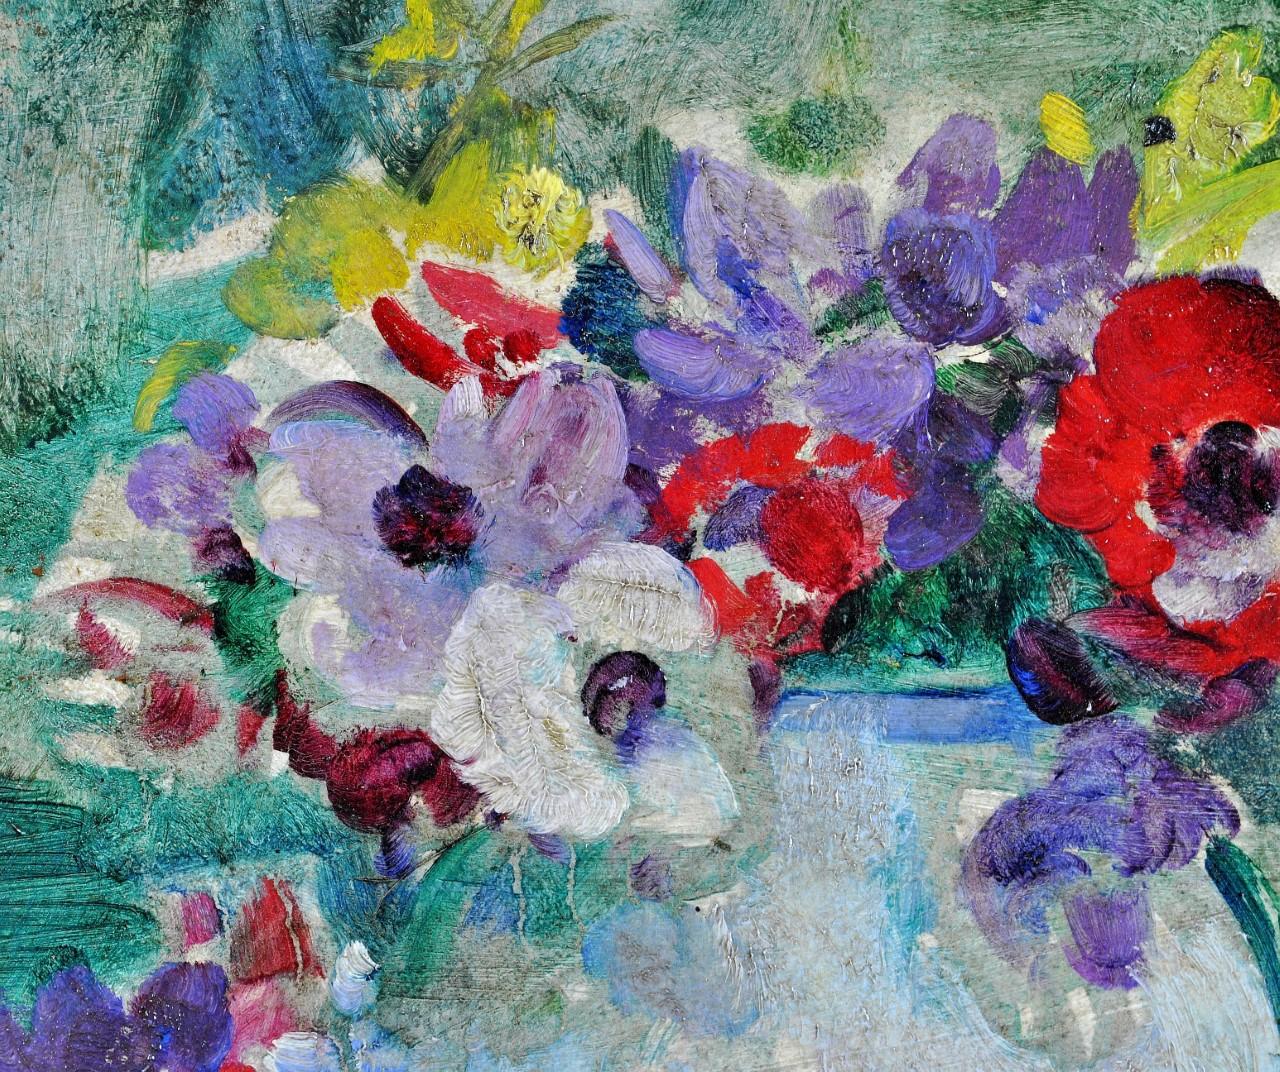 A very beautiful early 20th century impressionist oil on board still life depicting colourful anemones in a blue vase by Victor Simonin. This important and very fine work was exhibited at the retrospective exhibition of the artist in 1977, catalogue